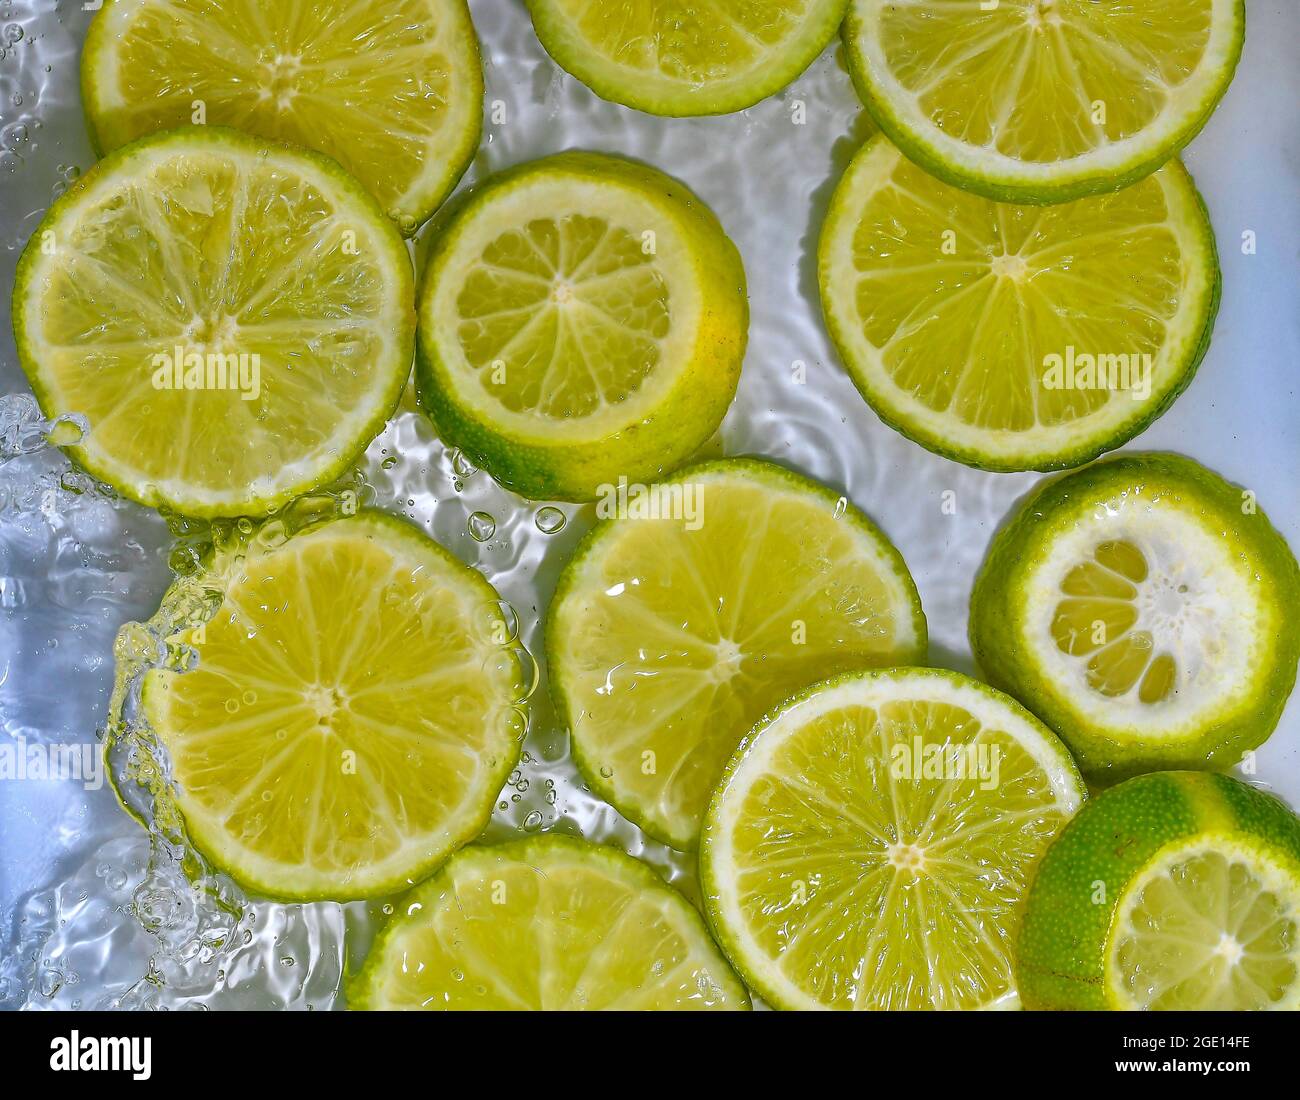 Limes close-up in liquid with bubbles. Slices of green ripe limes in water. Close-up fresh slices of yellow limes on white background Stock Photo